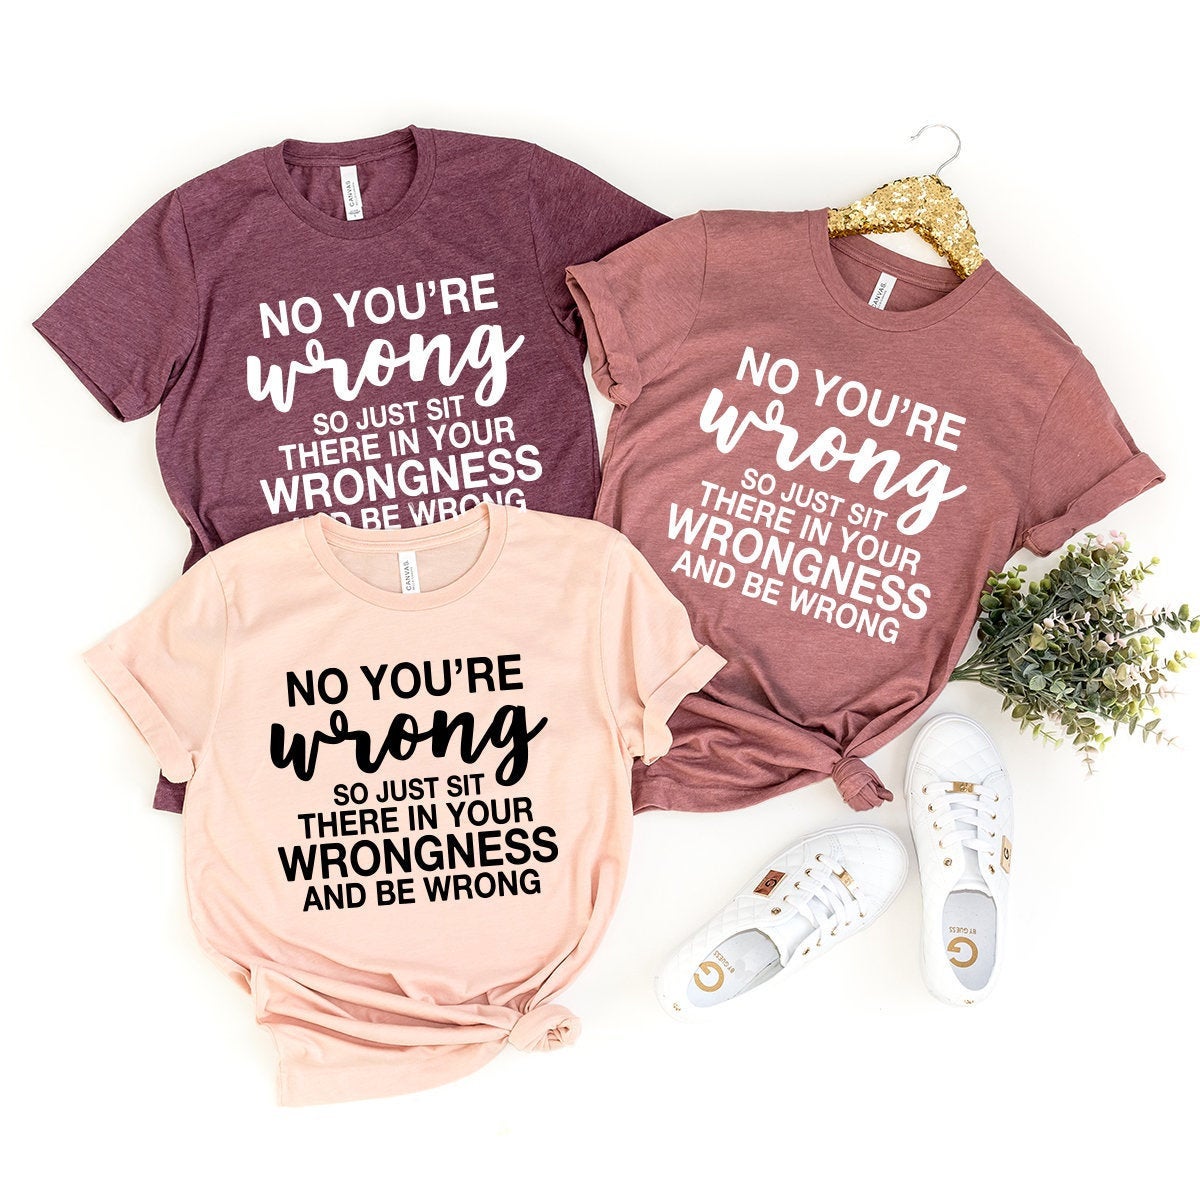 Funny Sarcastic Shirt, Mom Shirt, Women Birthday Gift, Sarcasm T-Shirt, Funny Quote Shirt, My Patience Tested I'm Negative Shirt, Sassy Tee - Fastdeliverytees.com